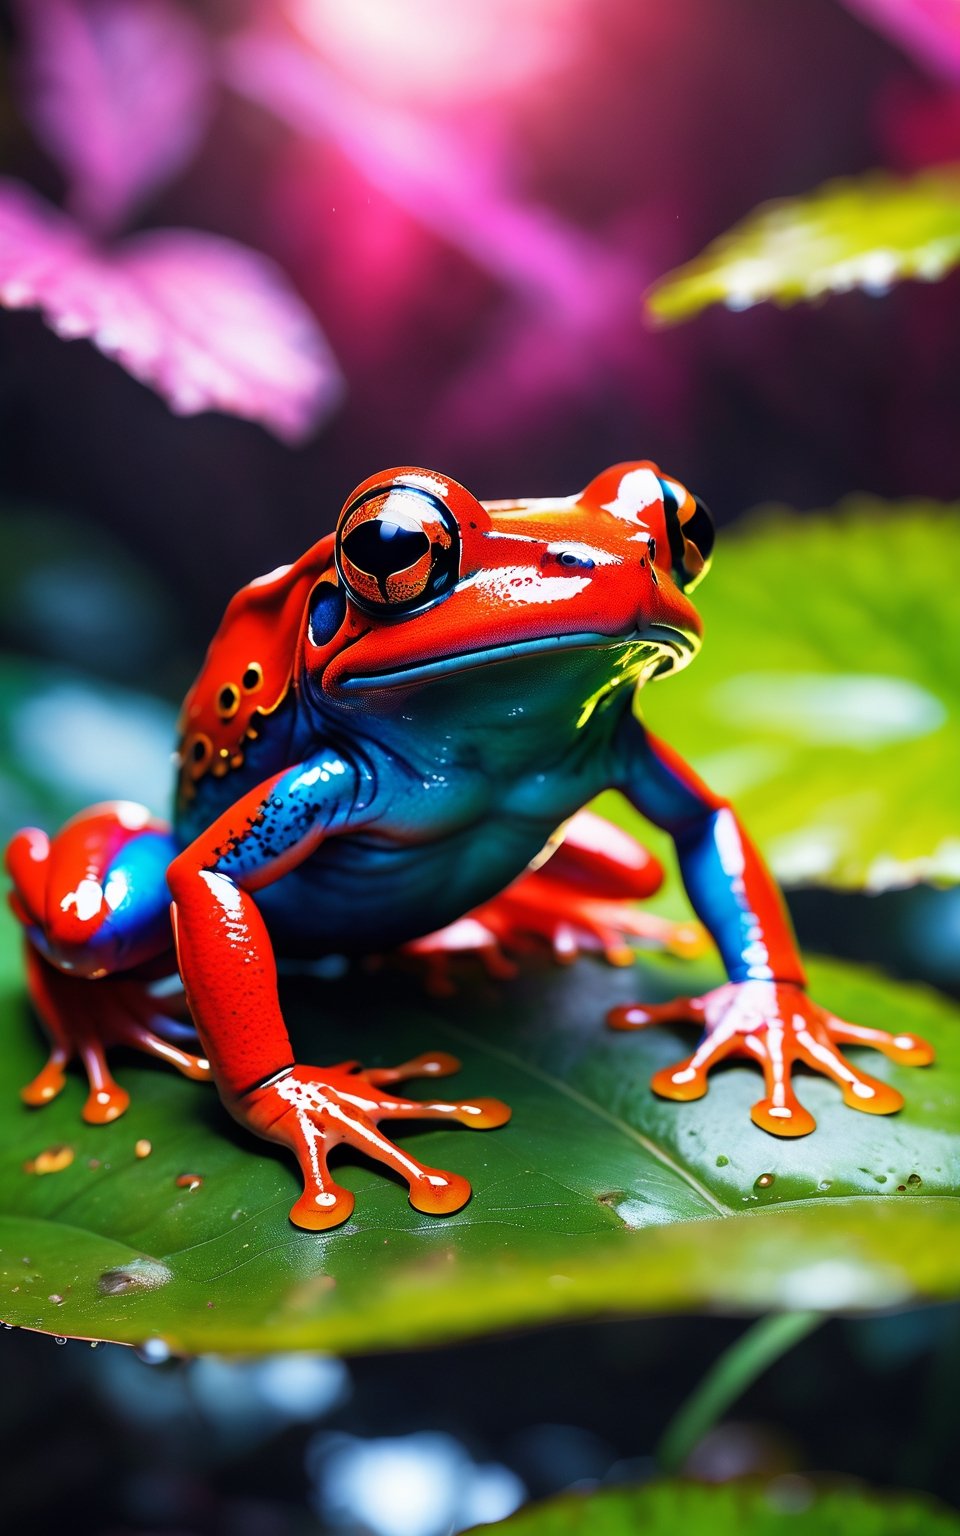 (best quality,8K,highres,masterpiece), ultra-detailed, (alien red frog), an otherworldly red frog with alien features. The frog's body is adorned with exotic patterns and textures, reminiscent of extraterrestrial origins. Its vibrant red skin contrasts with the surrounding environment, adding to its alien allure. The frog's eyes gleam with an otherworldly glow, hinting at its mysterious nature. Feel free to add your own creative touches to enhance the unique and otherworldly qualities of this captivating creature.